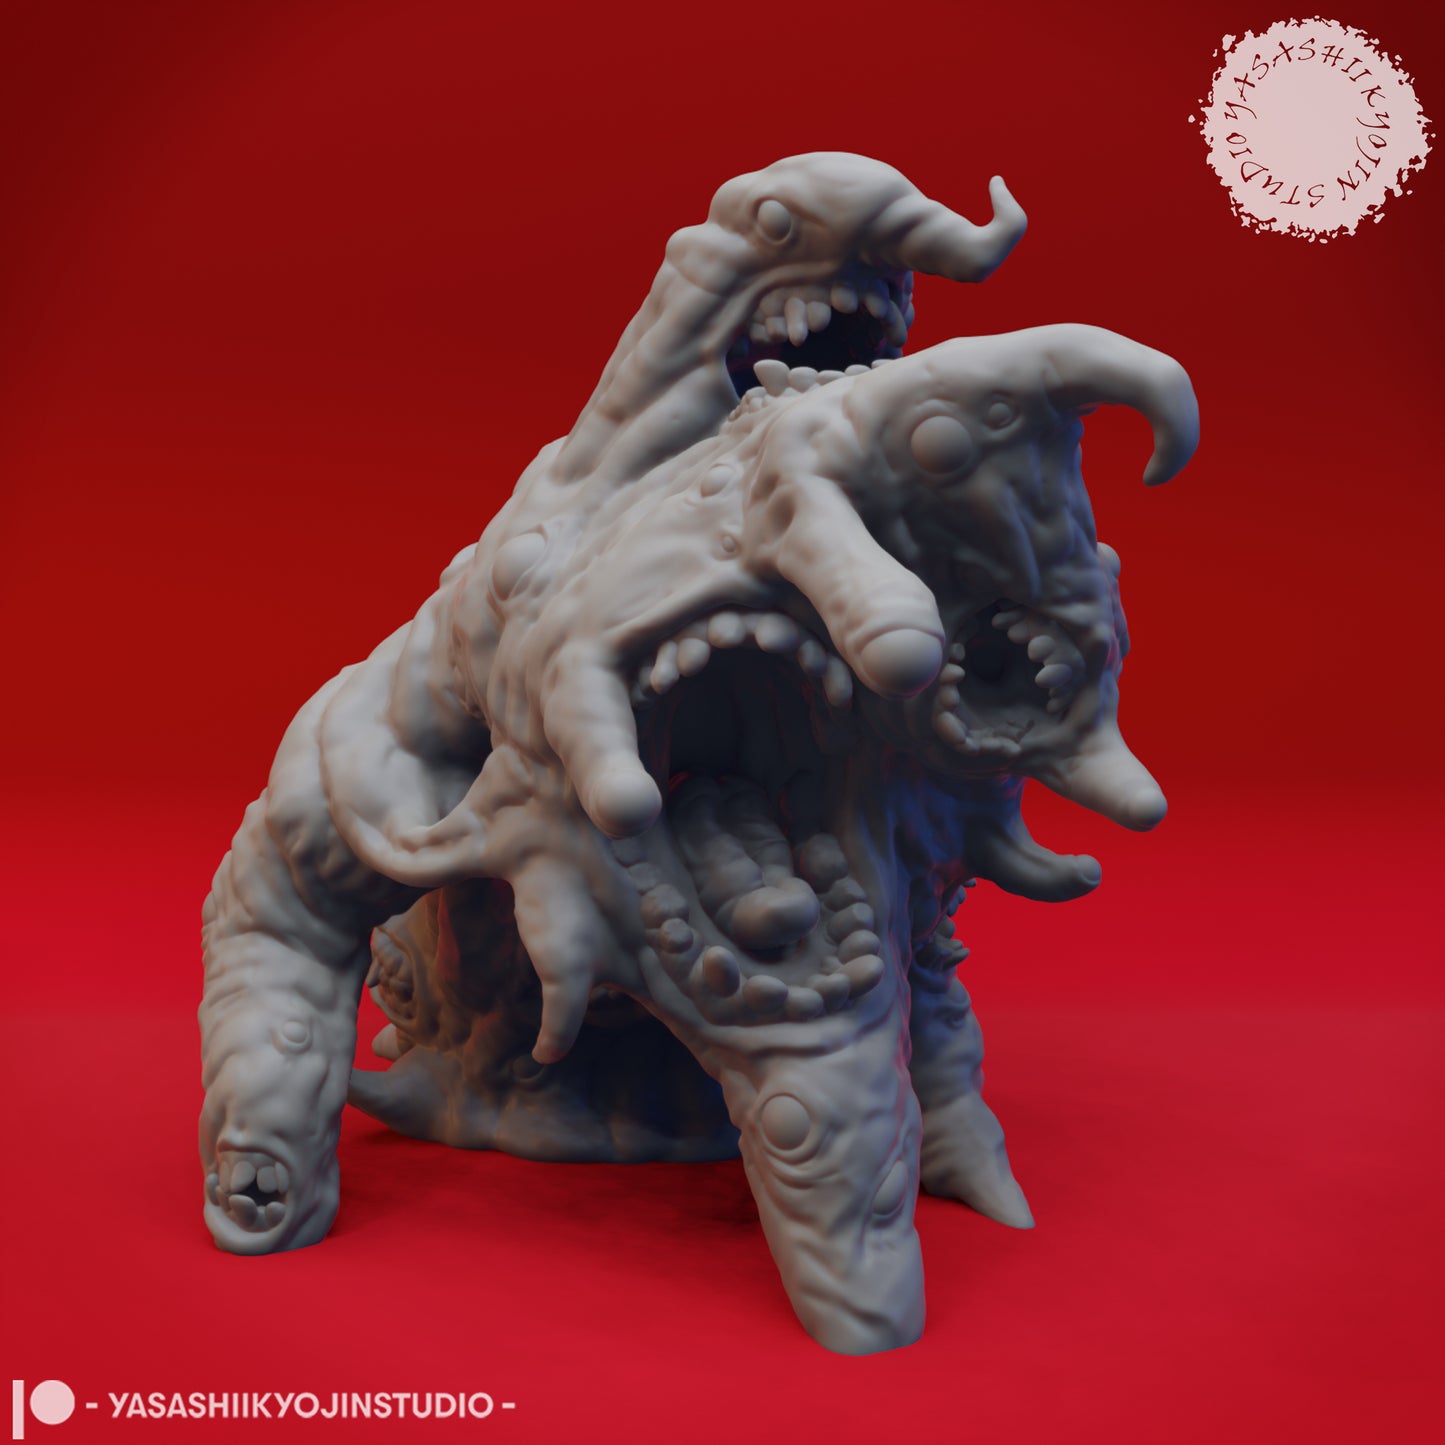 Gibbering Mouther - Tabletop Miniature (Pre-Supported STL)